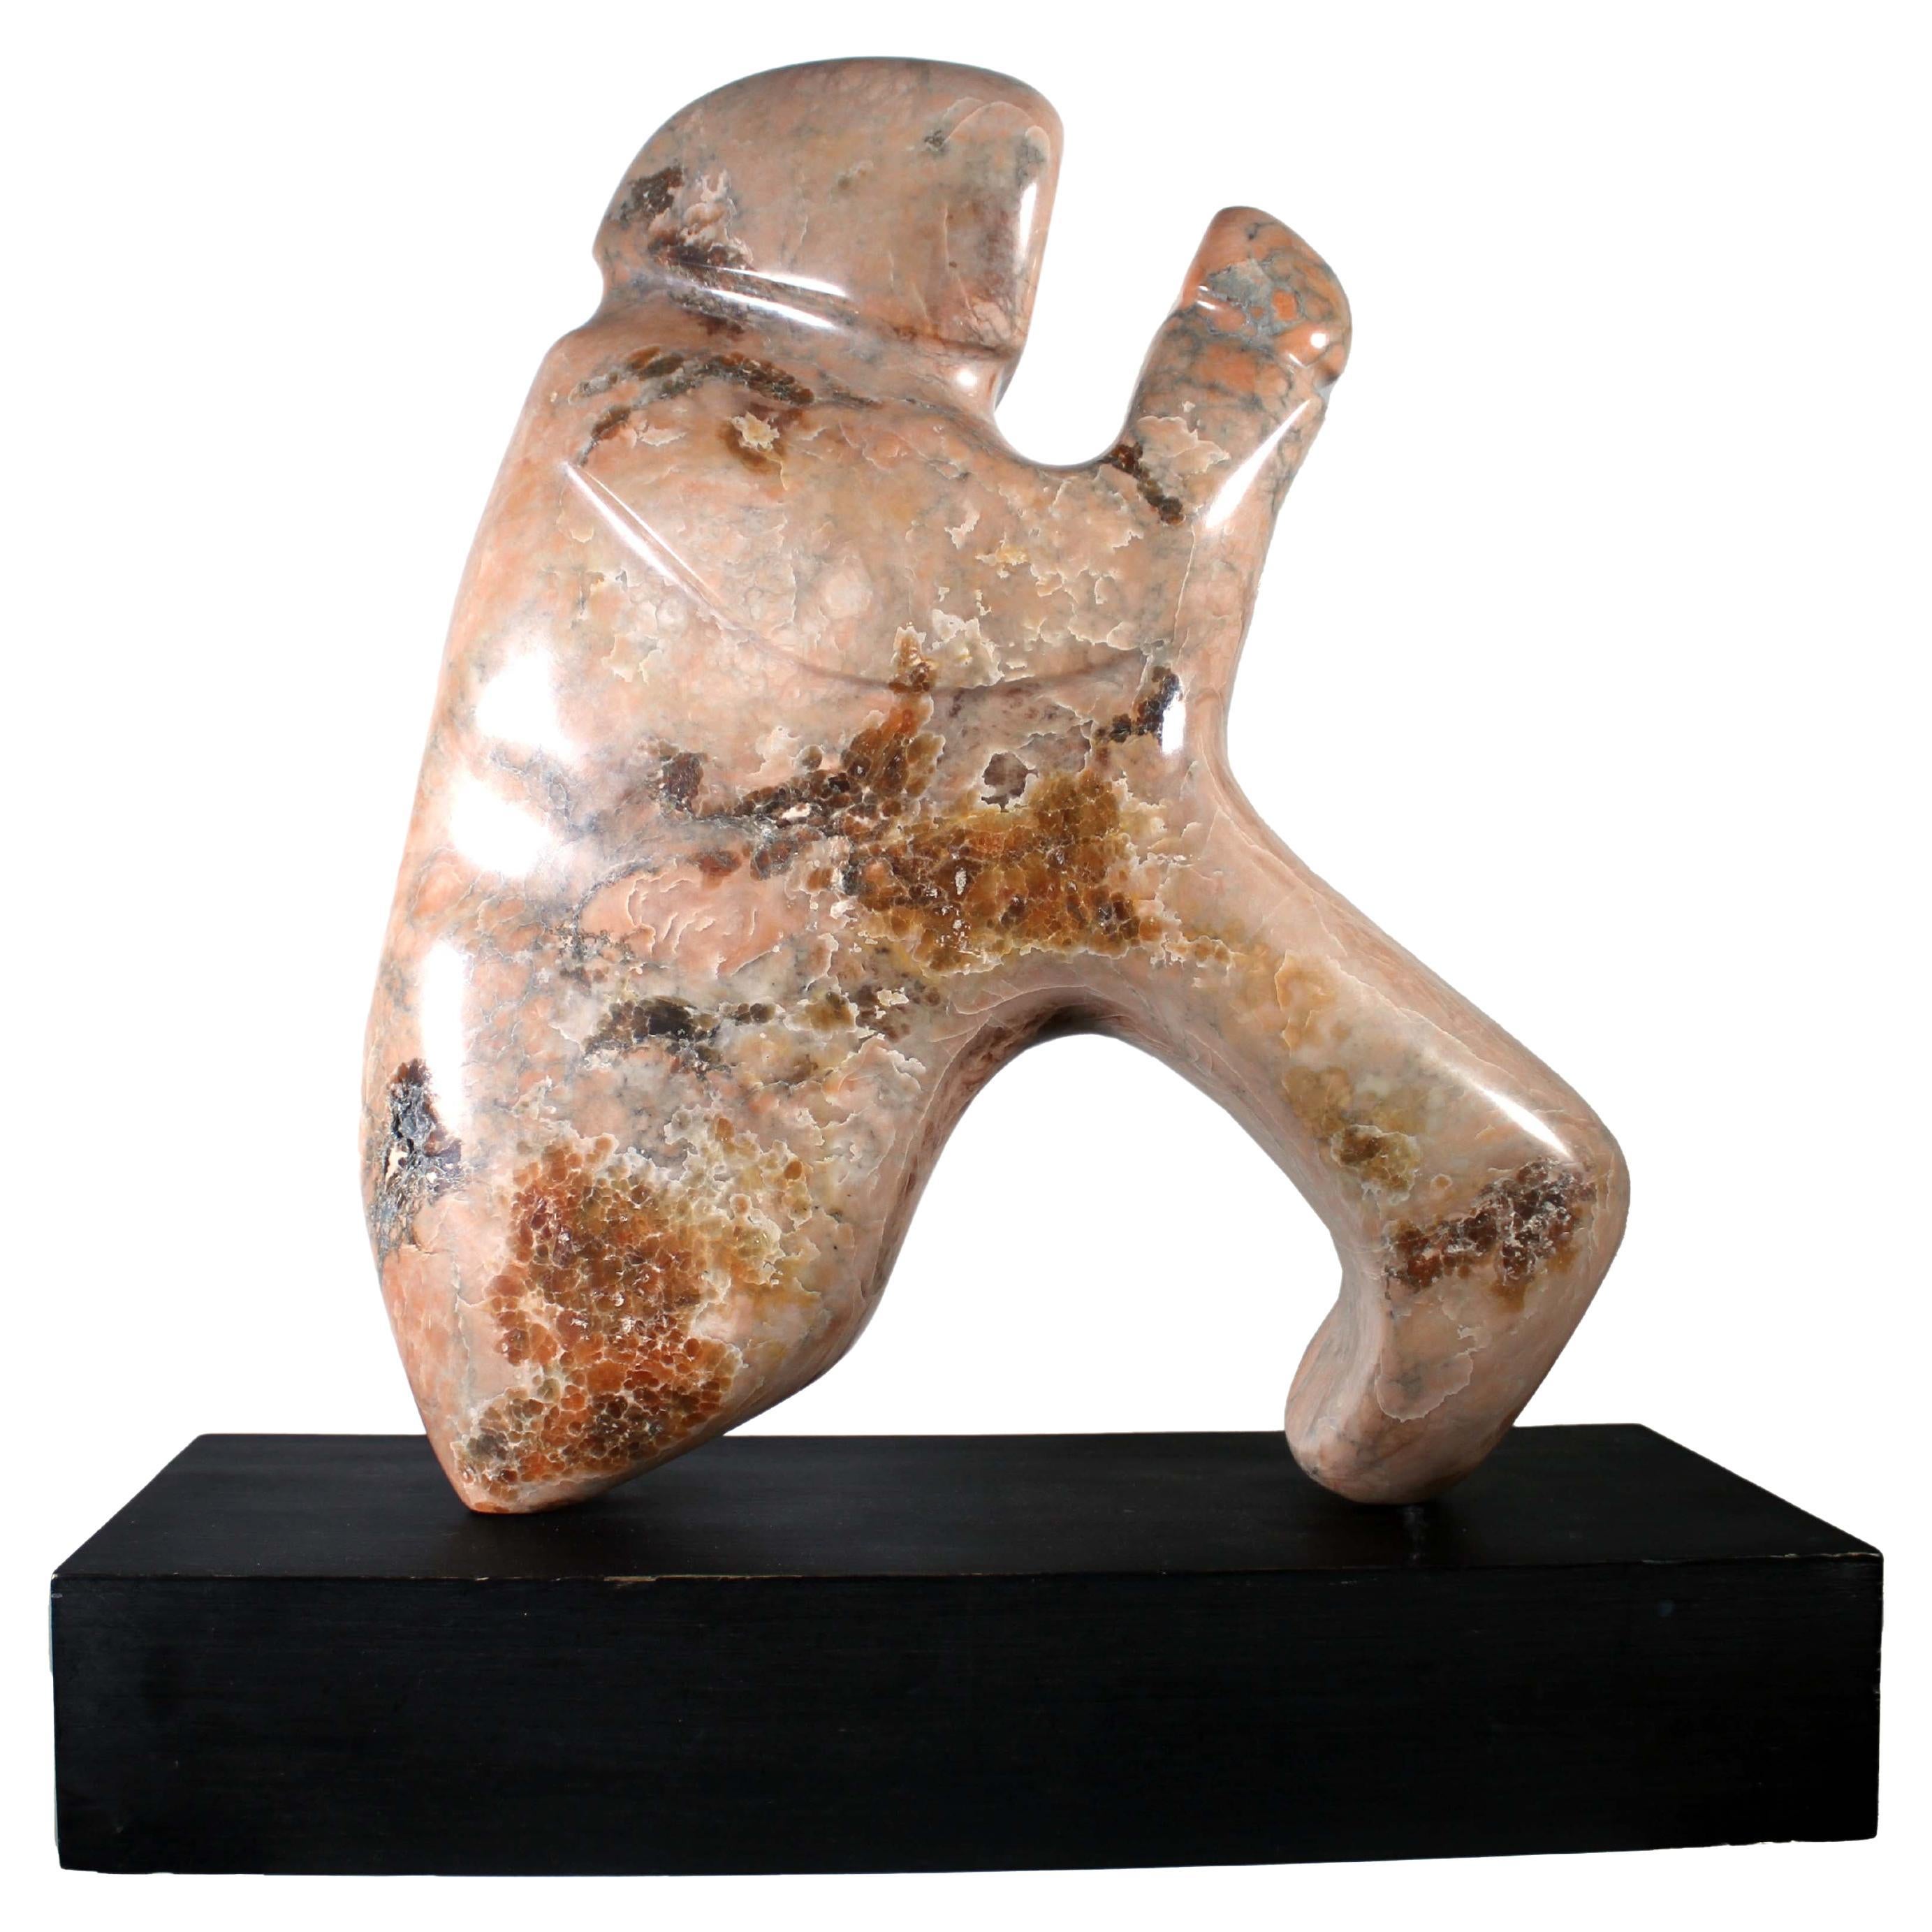 Contemporary Modernist Verona Pink Marble Biomorphic Abstract Sculpture on Base